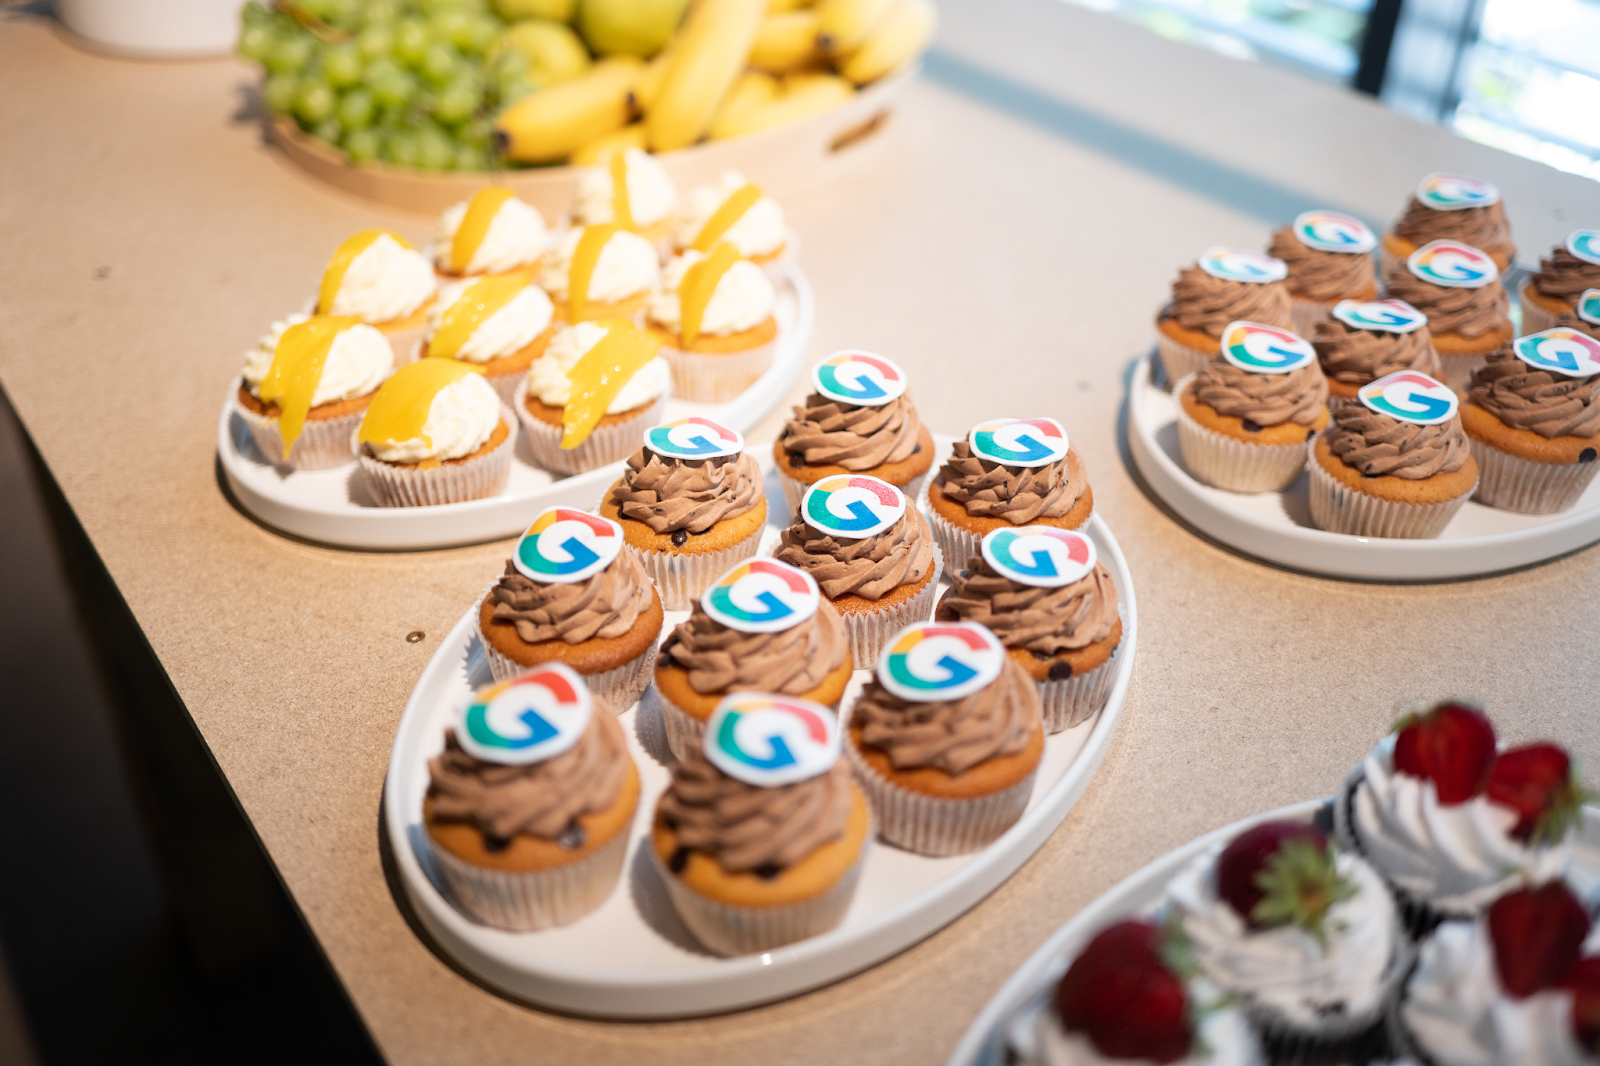 News about Tools4AgileTeams 2022 - culinary masterpieces, like different kinds of cupcakes